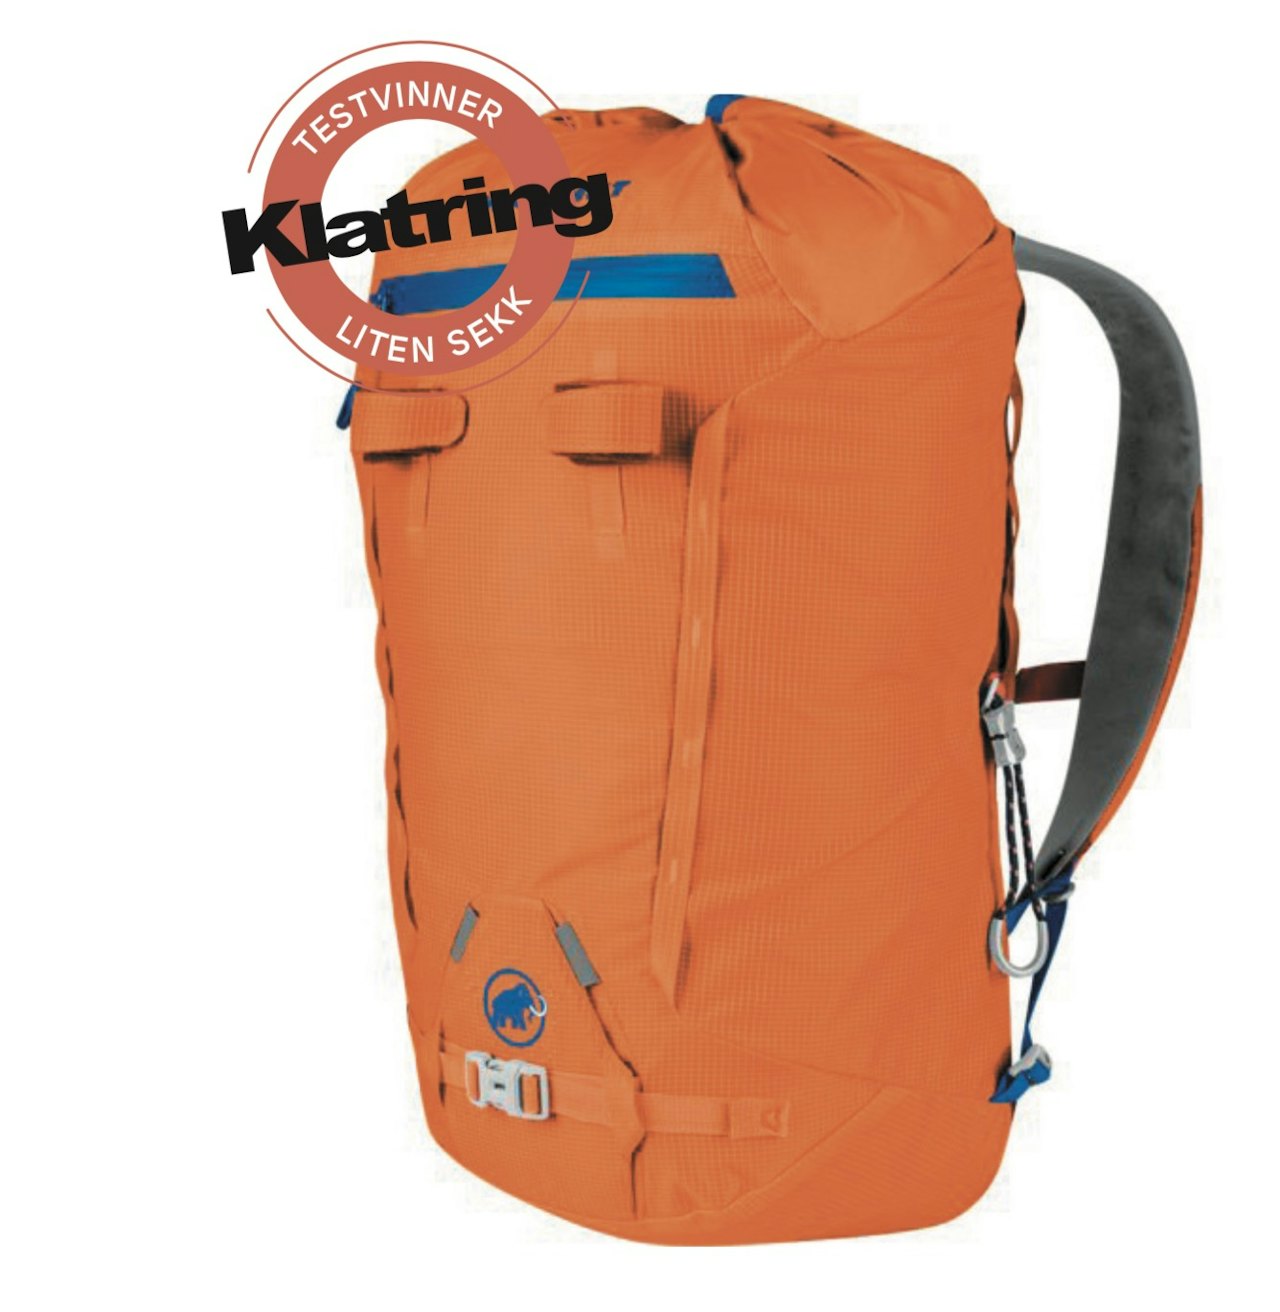 Mammut Trion Nordwand 20 Eiger Extreme 